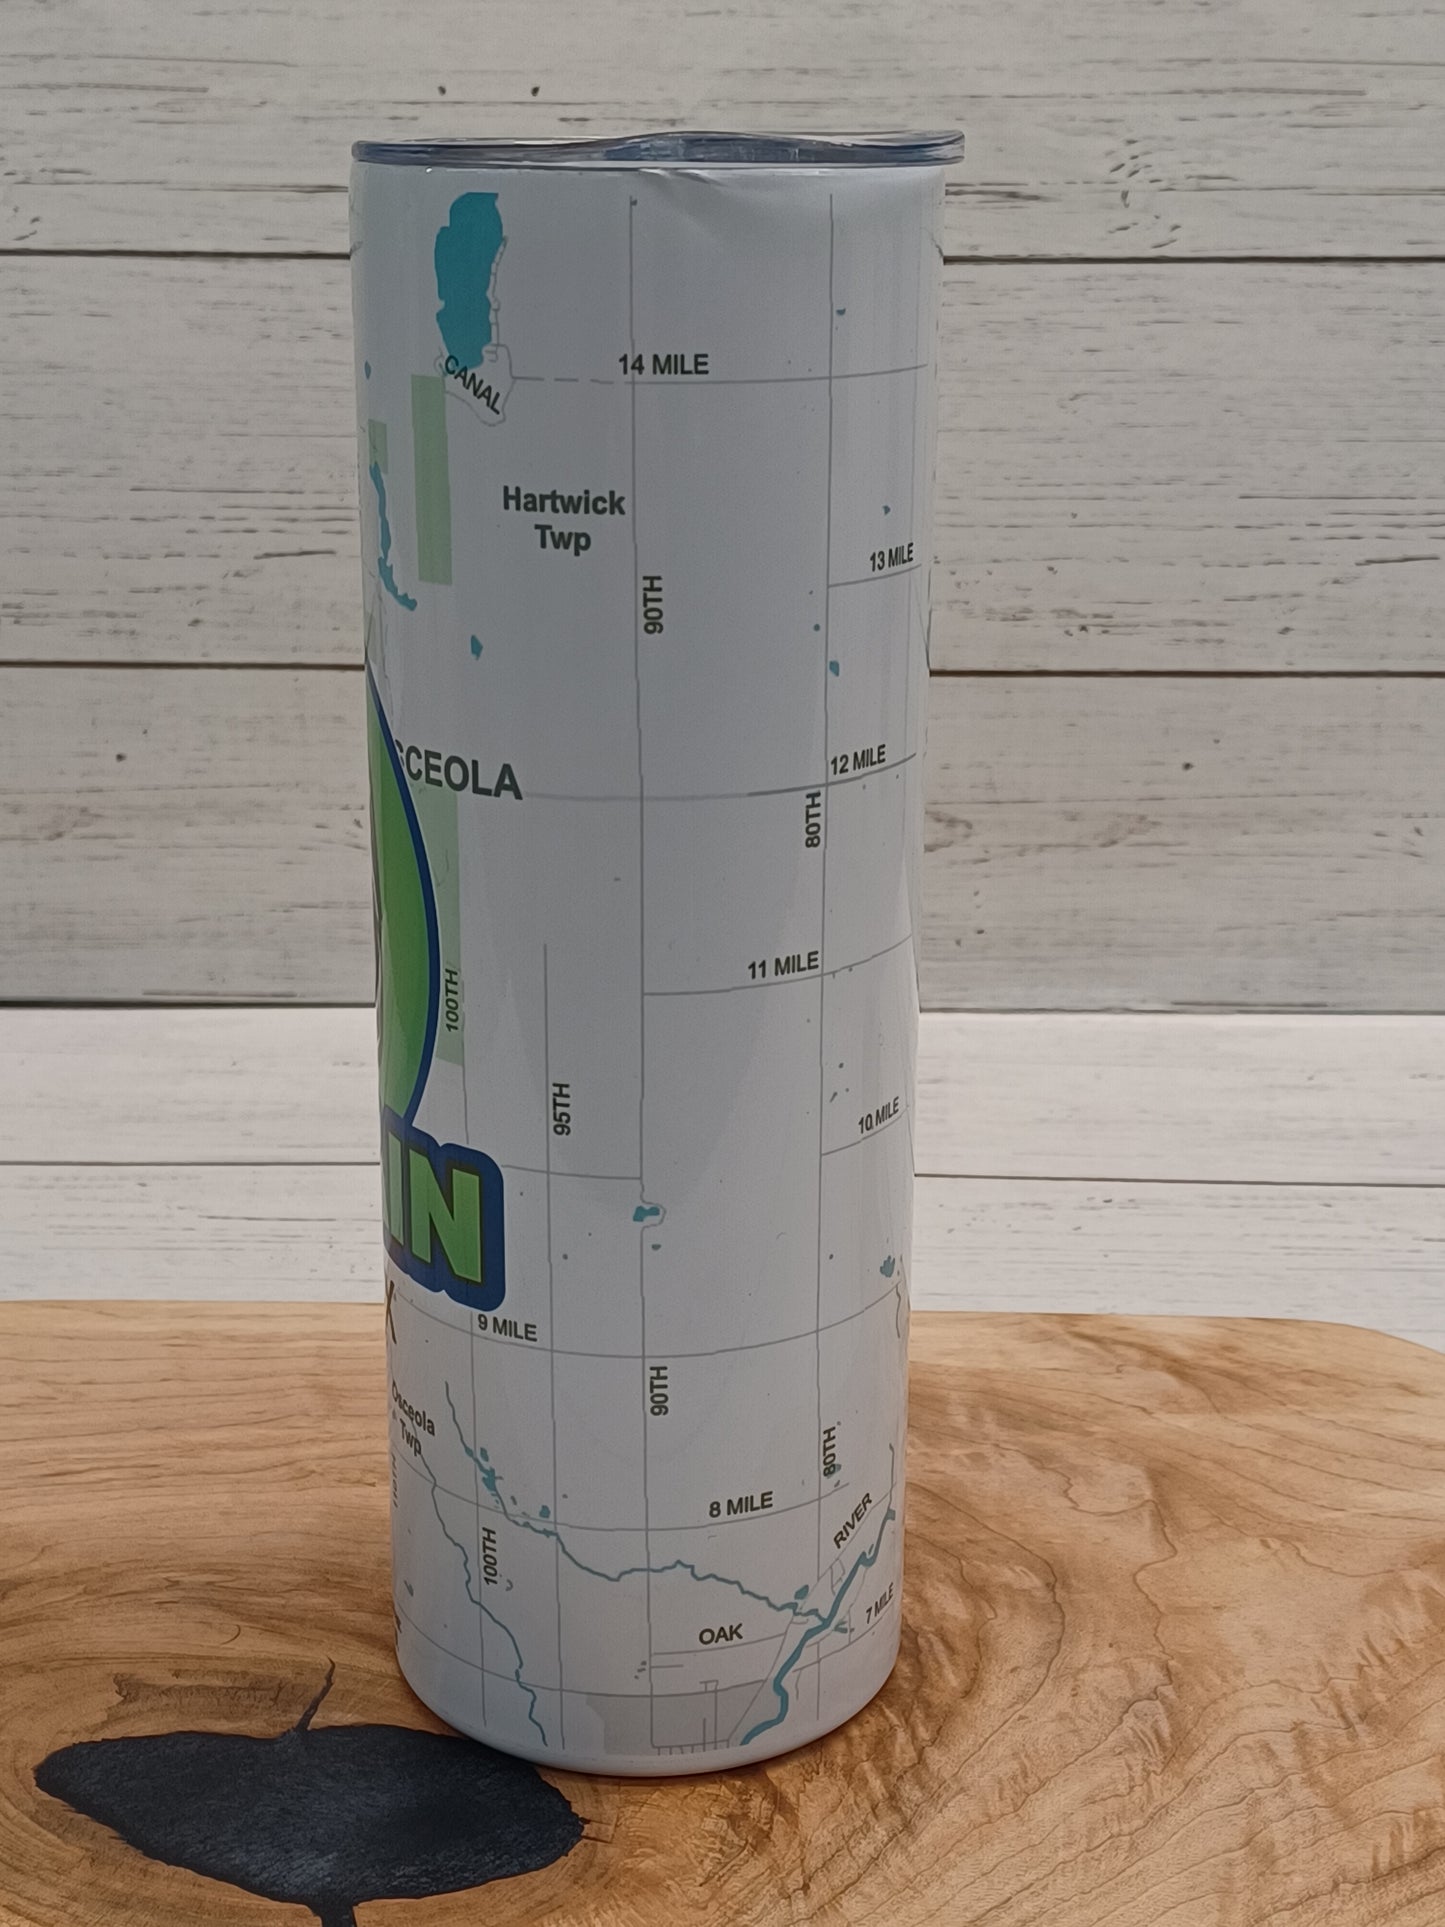 Captain 250FX Trail Map 20oz Insulated Drink Tumbler